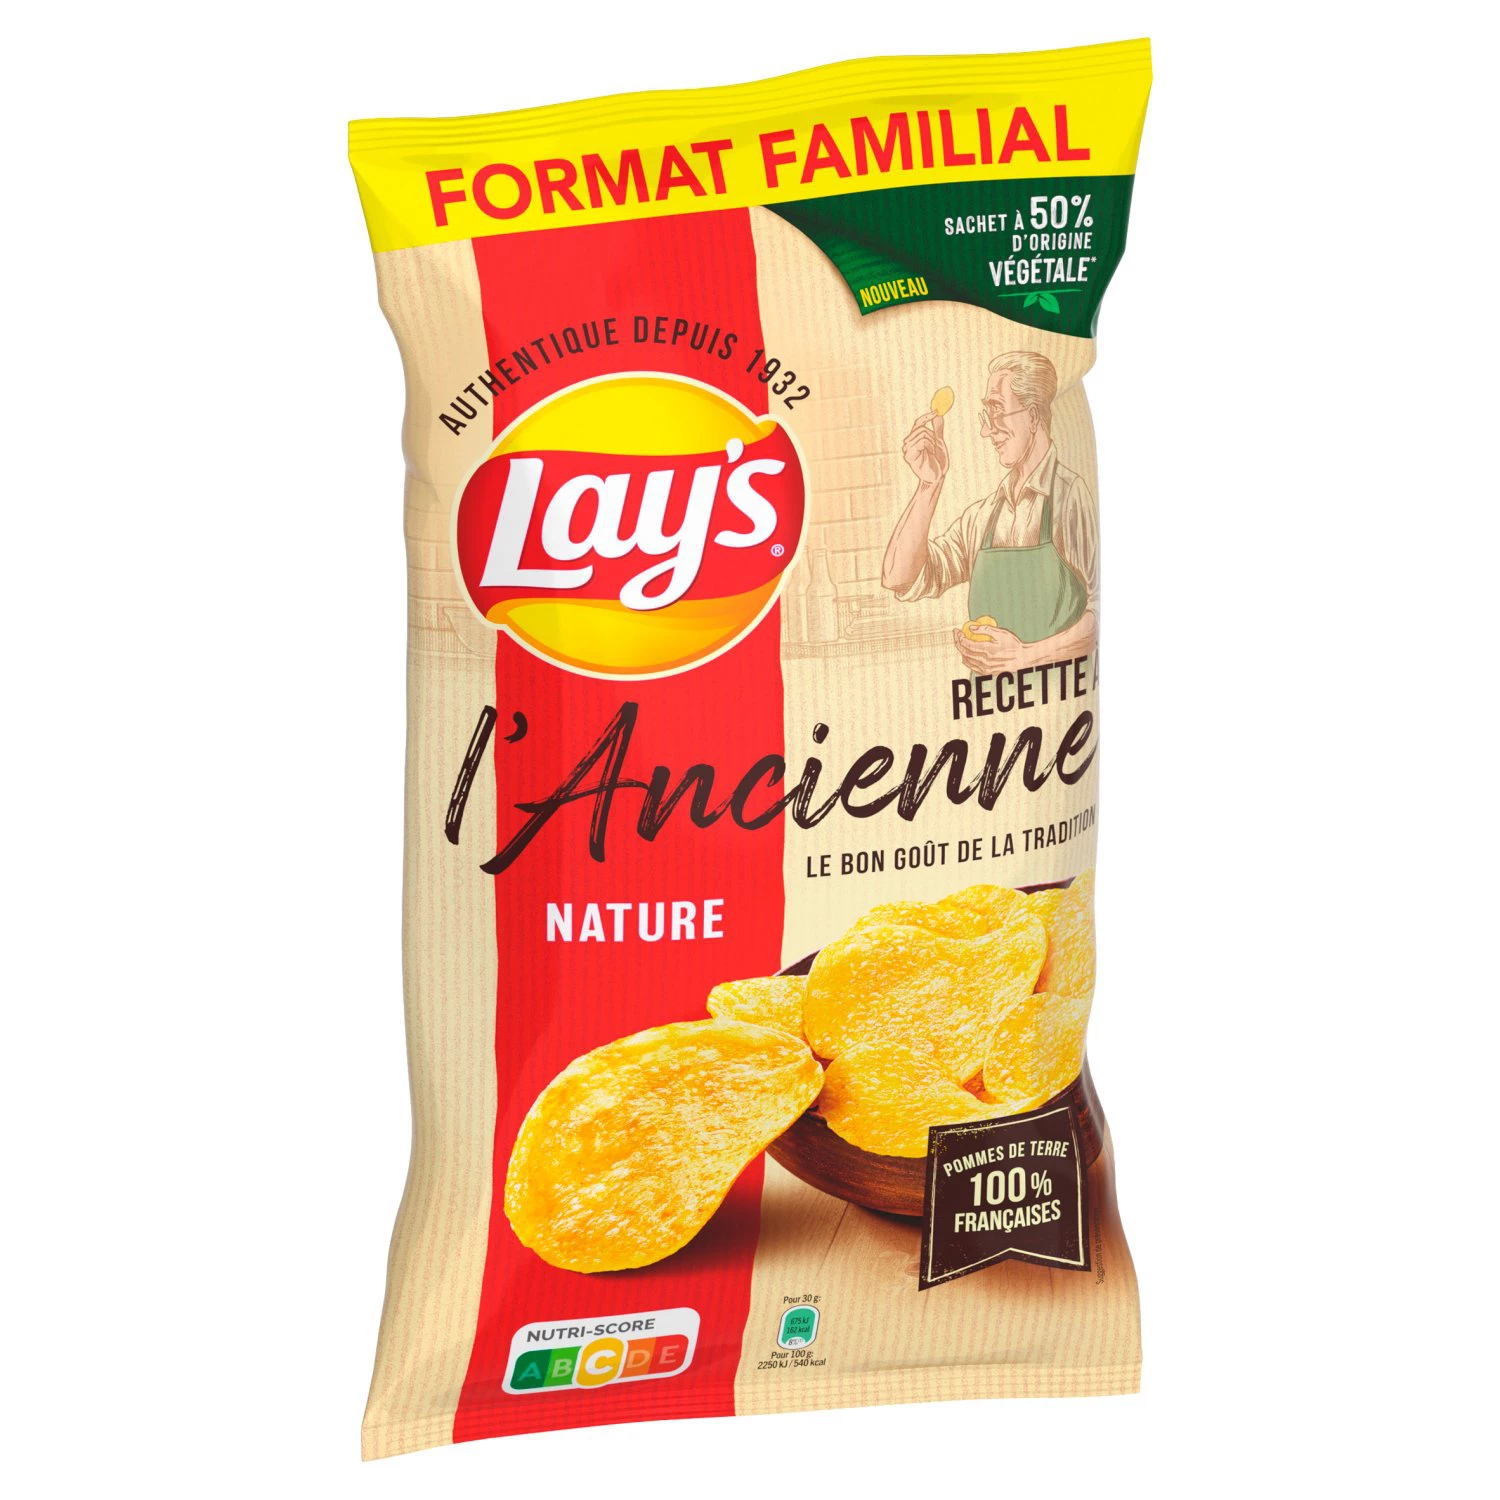 Chips à l'Ancienne Nature  familial, 295g - LAY'S